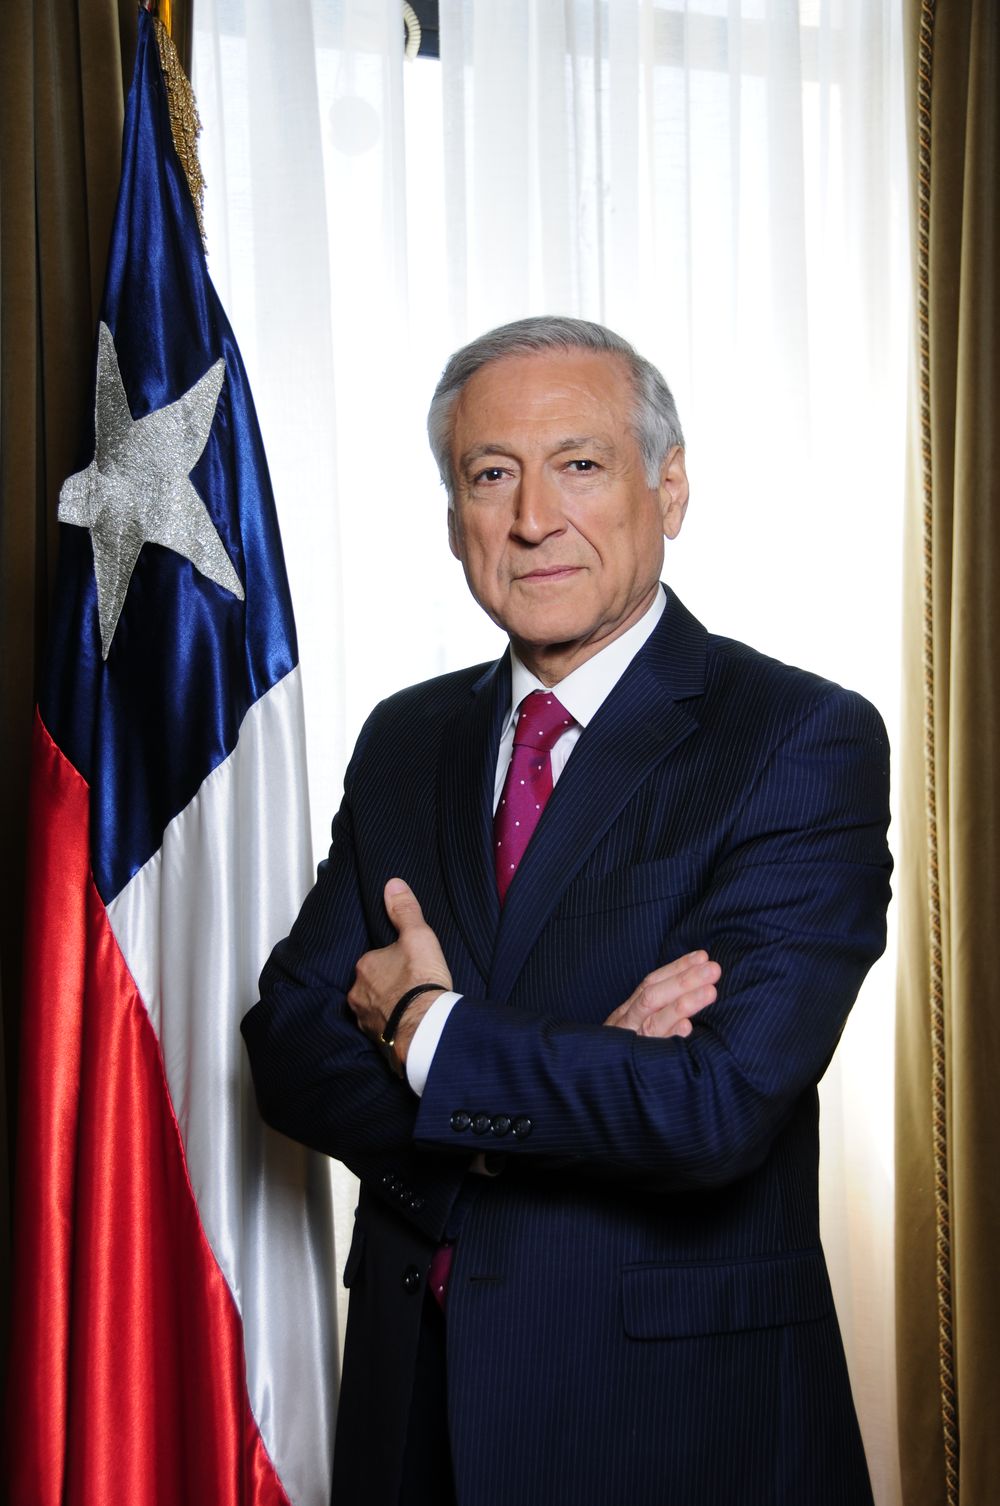 Minister of Foreign Affairs of Chile Heraldo Munoz